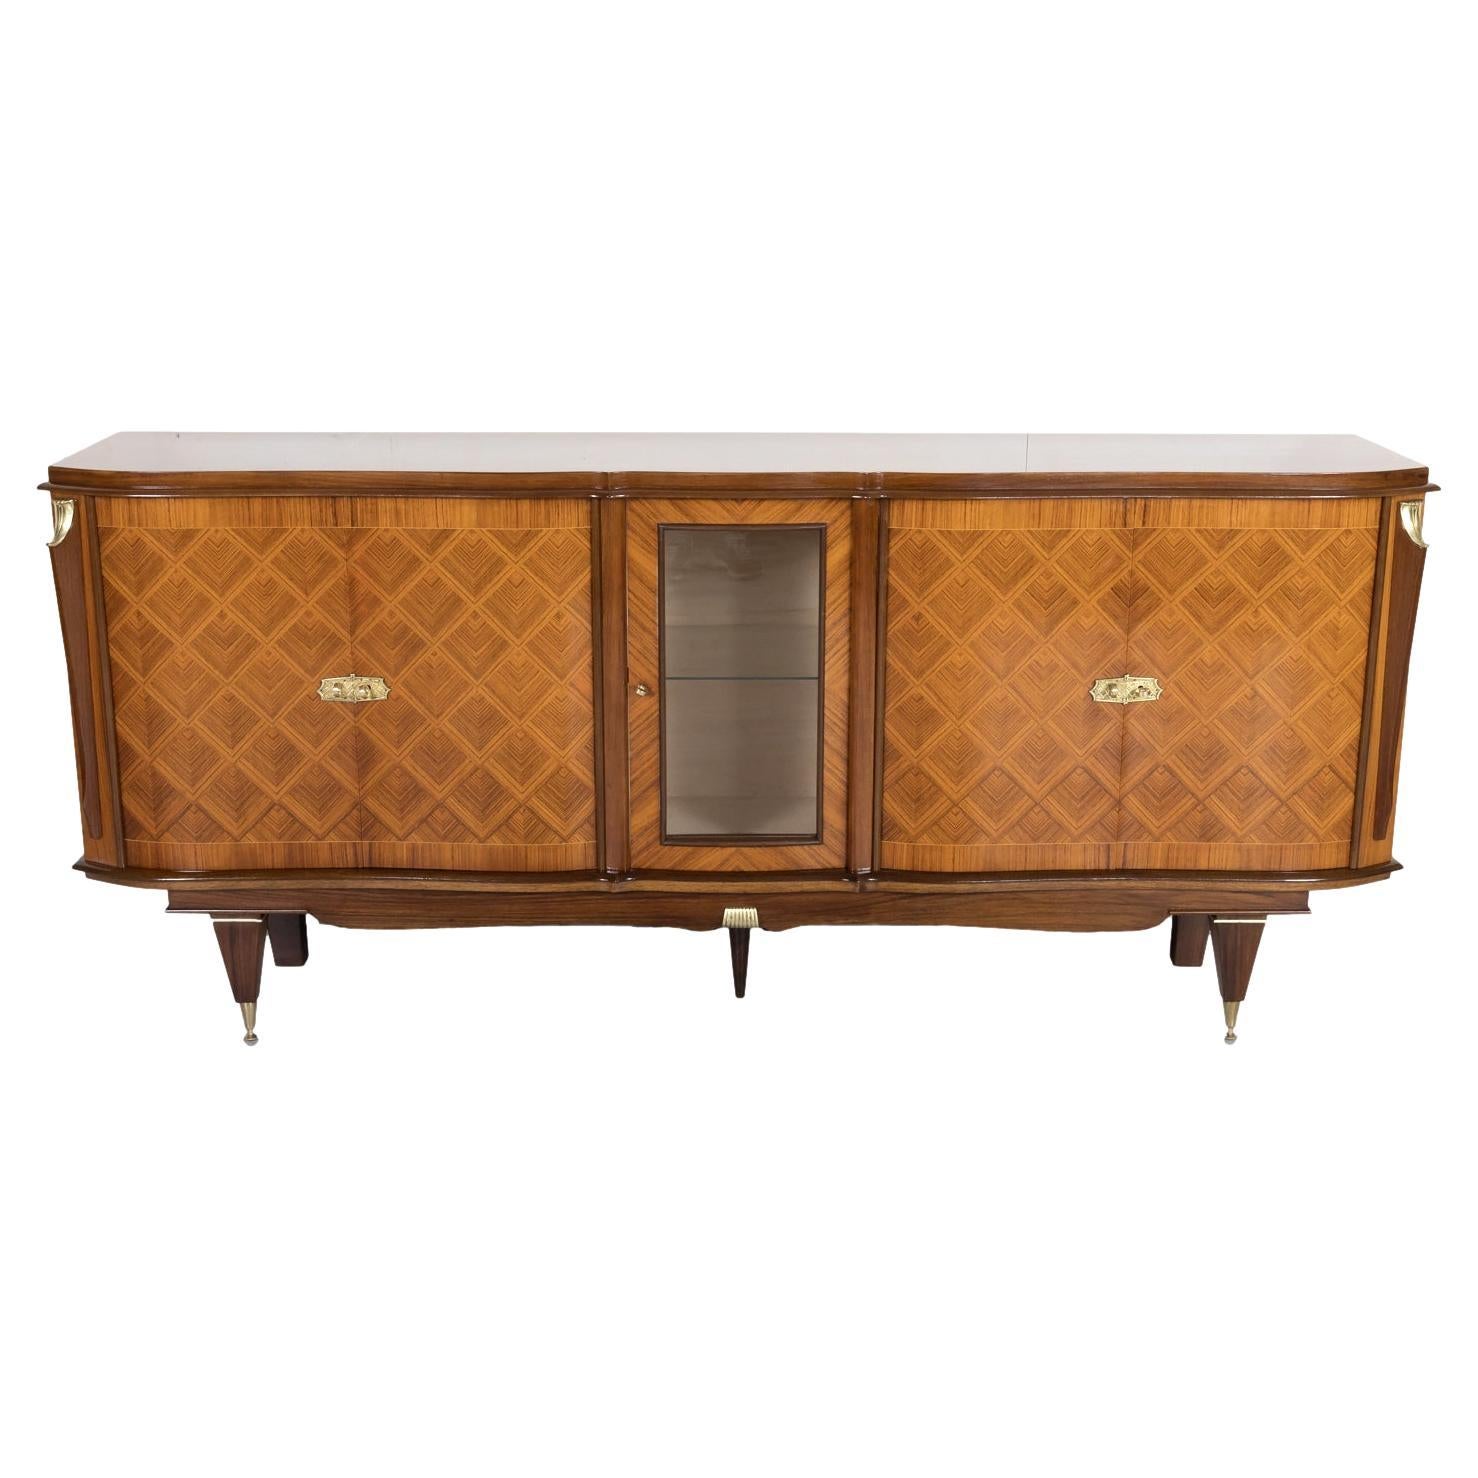 French Art Deco Mahogany and Palisander Parquetry Buffet or Sideboard